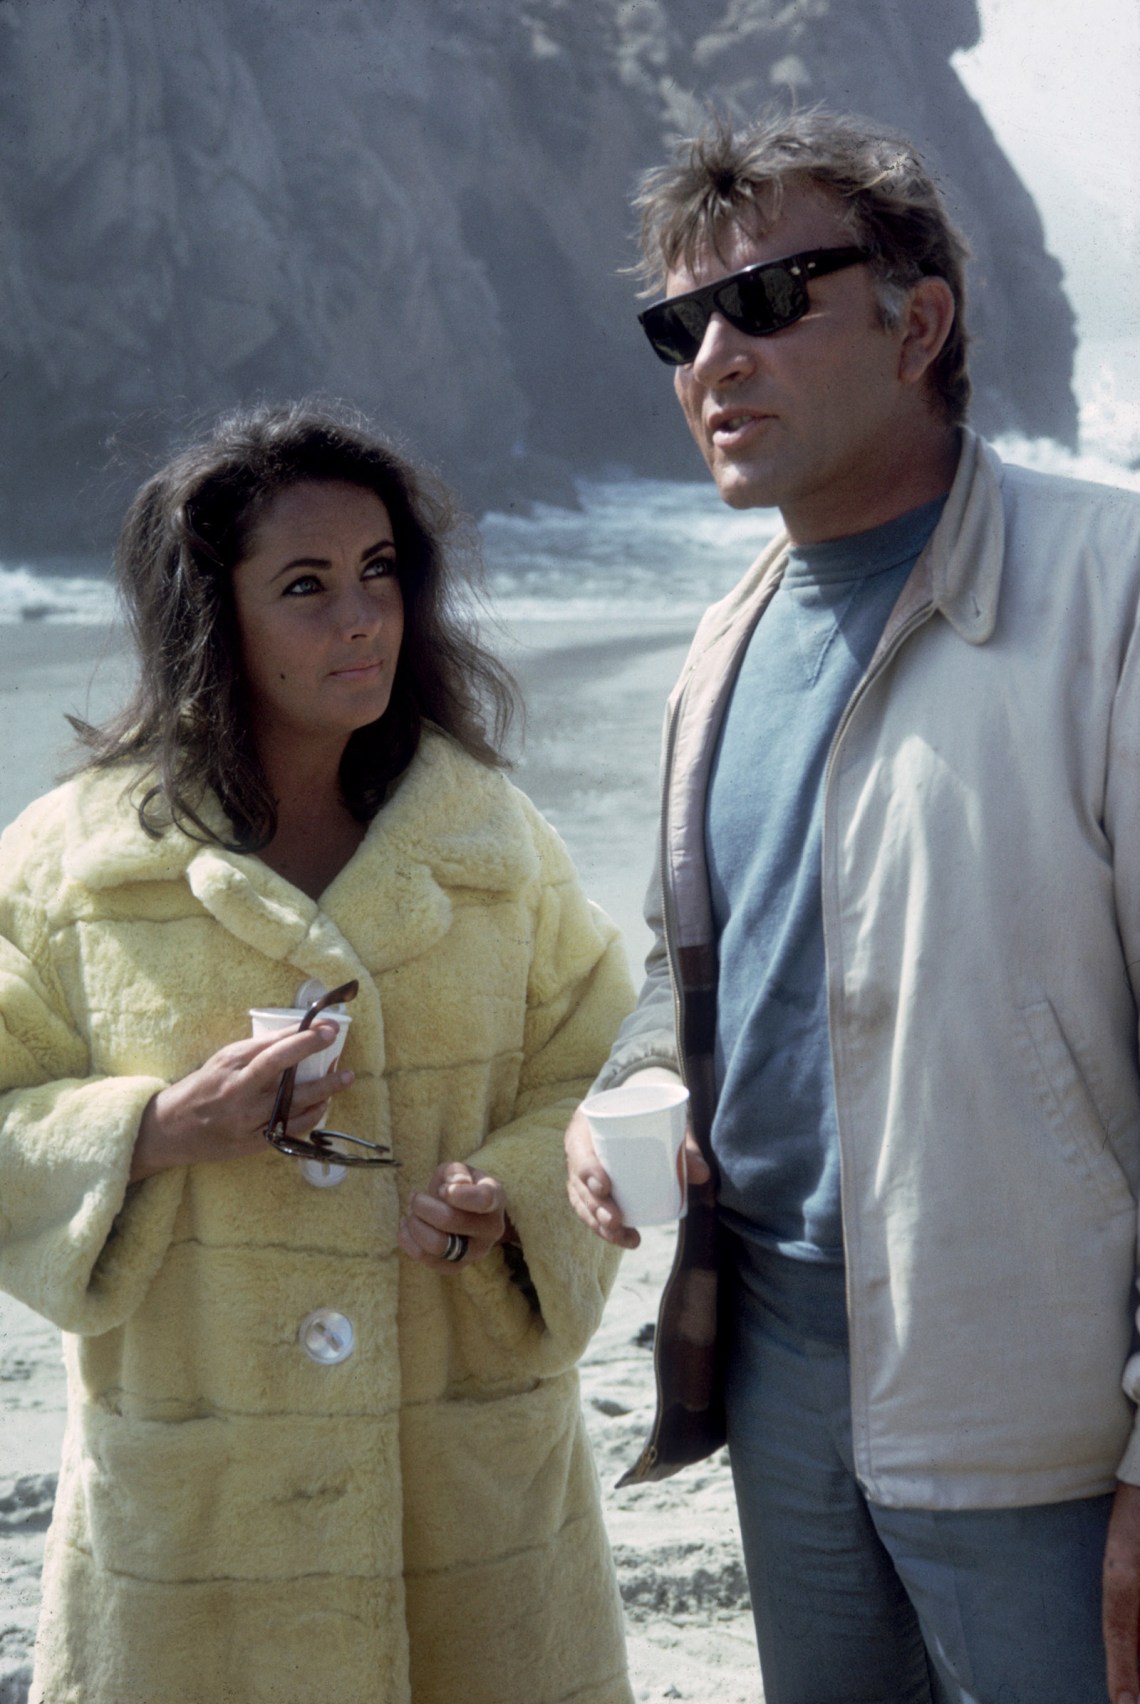 Elizabeth Taylor and Richard Burton during the filming of The Sandpiper, Big Sur, California